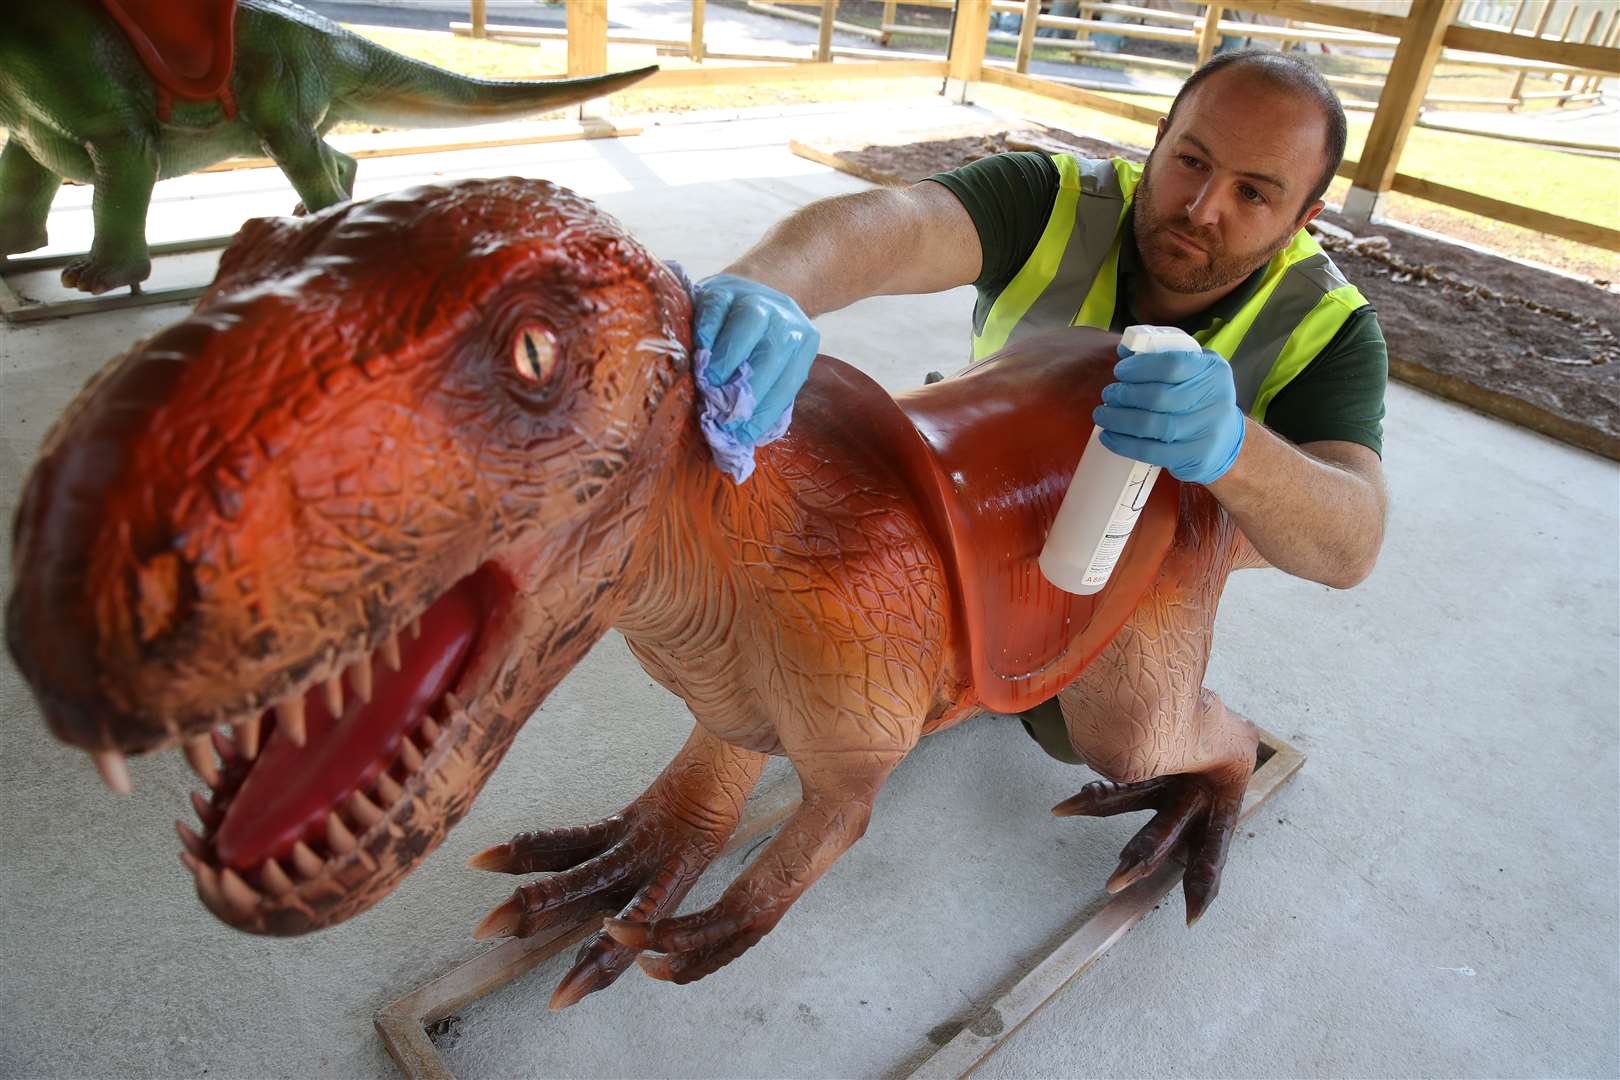 Mr Warren cleans an exhibit at the new World of Dinosaurs attraction (Andrew Milligan/PA)